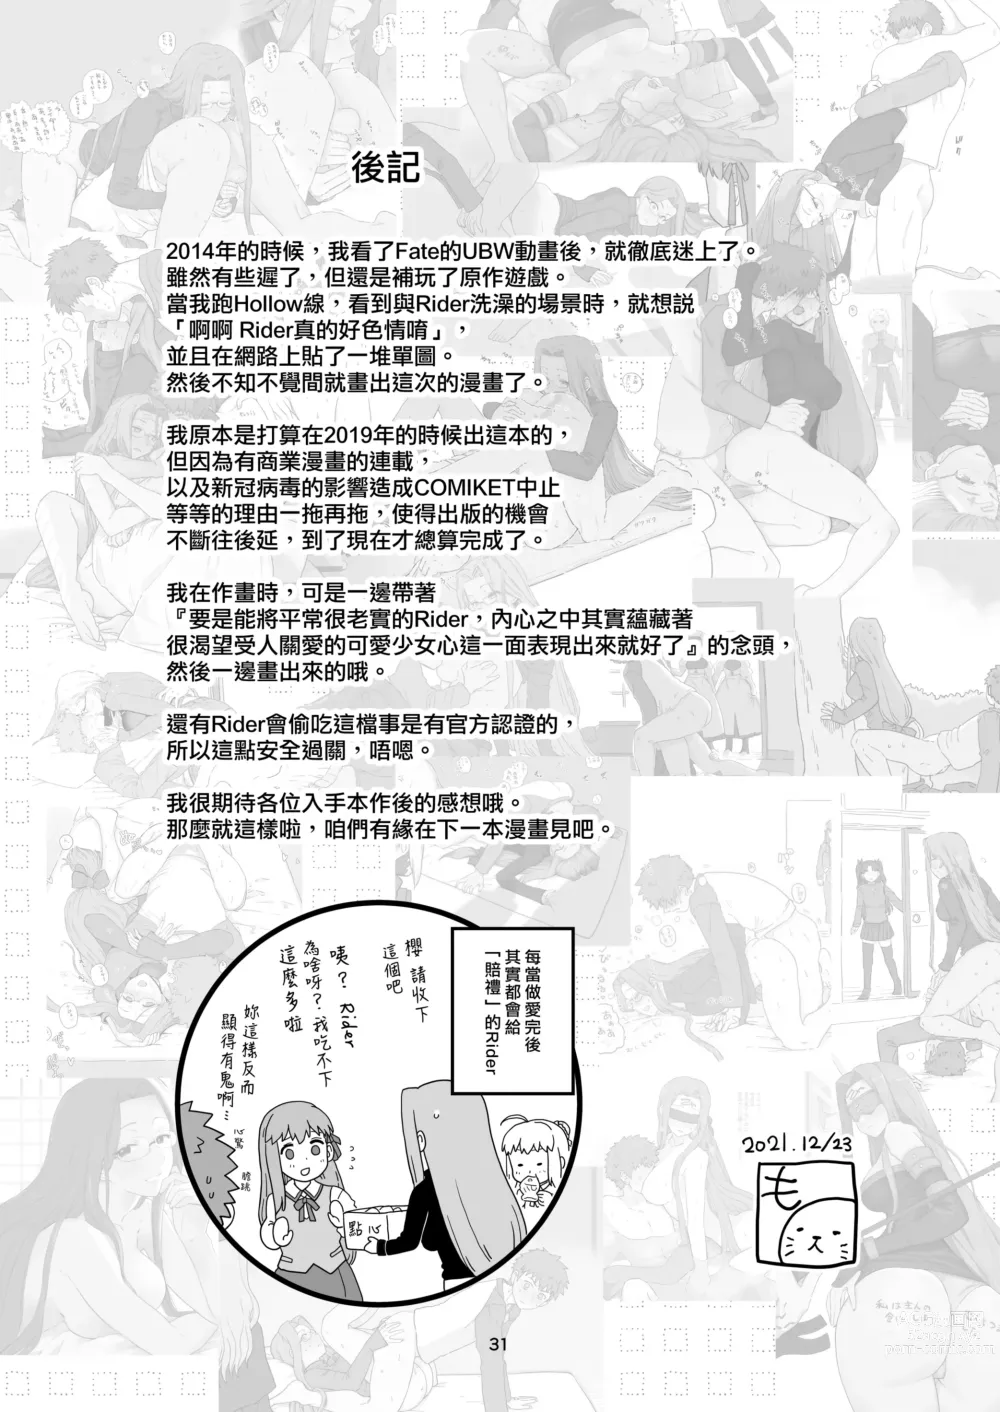 Page 34 of doujinshi Rider小姐的偷吃 (decensored)